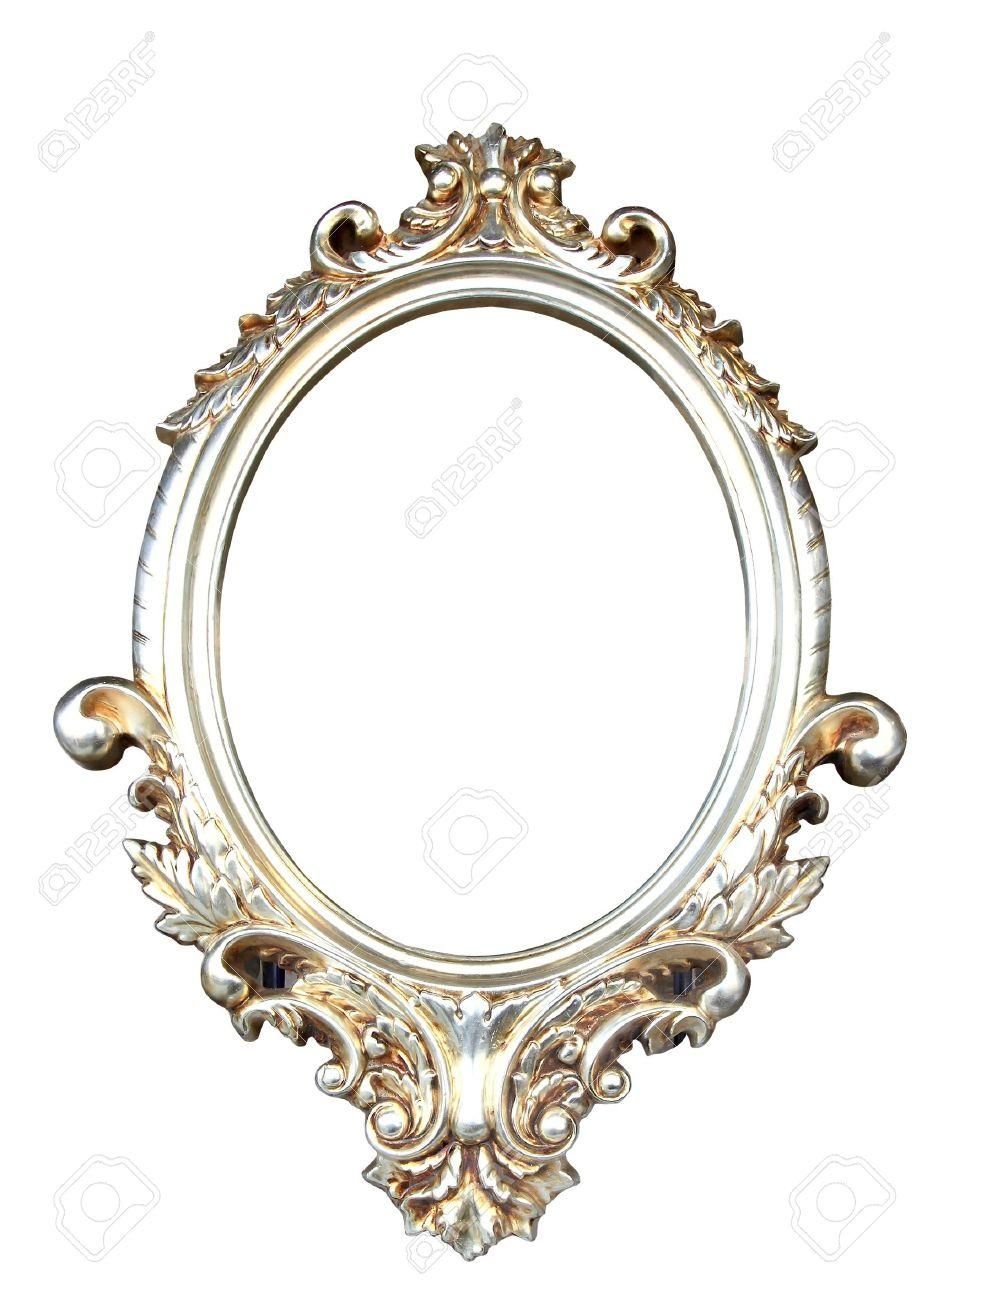 Ornate Vintage Frame With Clipping Path Stock Photo, Picture And Pertaining To Ornate Oval Mirrors (View 18 of 20)